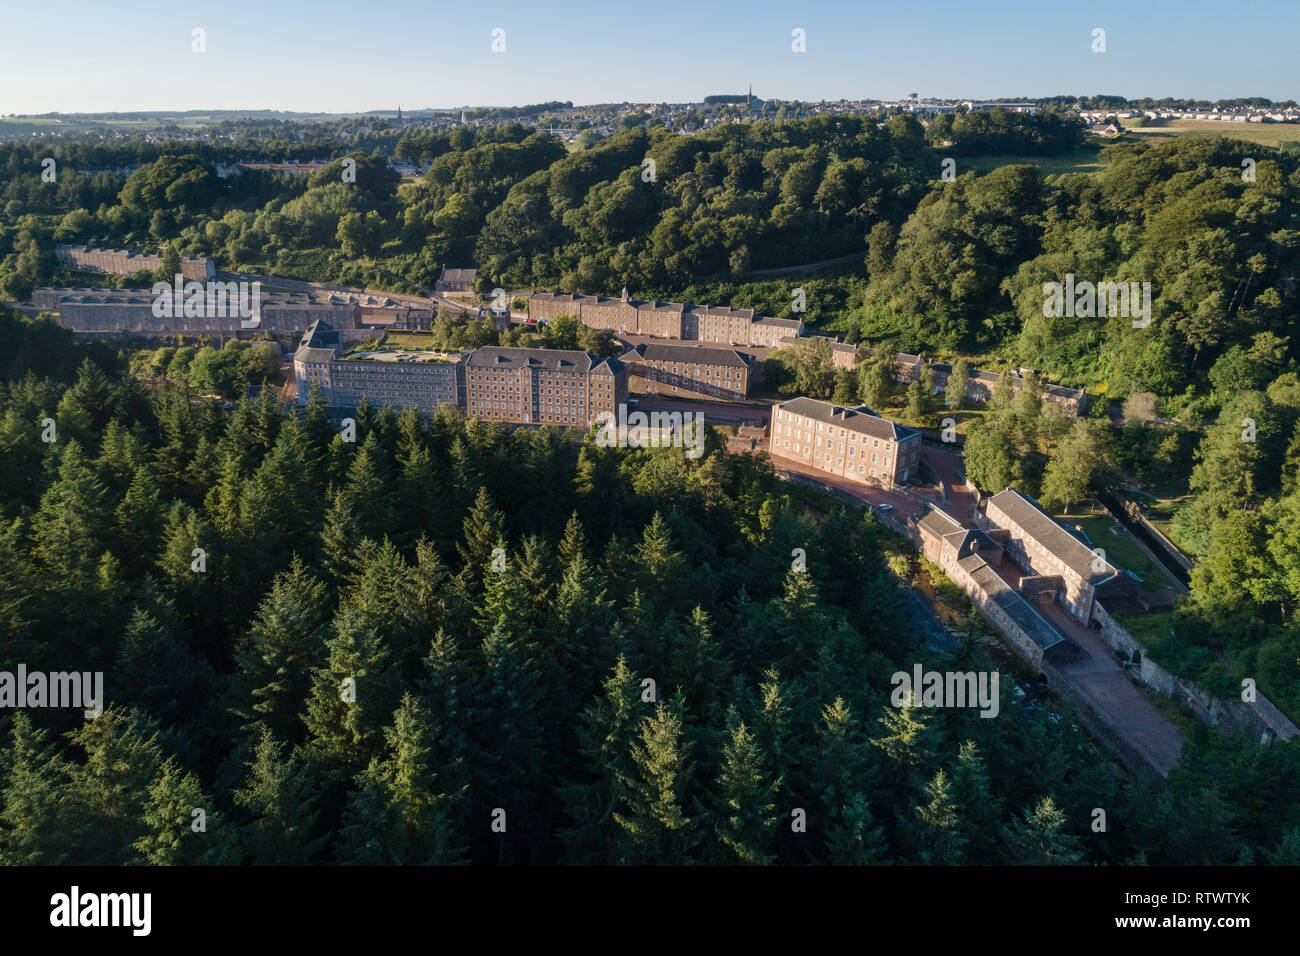 Aerial Image showing World Heritage Site of New Lanark in South Lanarkshire, Southern Scotland. Stock Photo